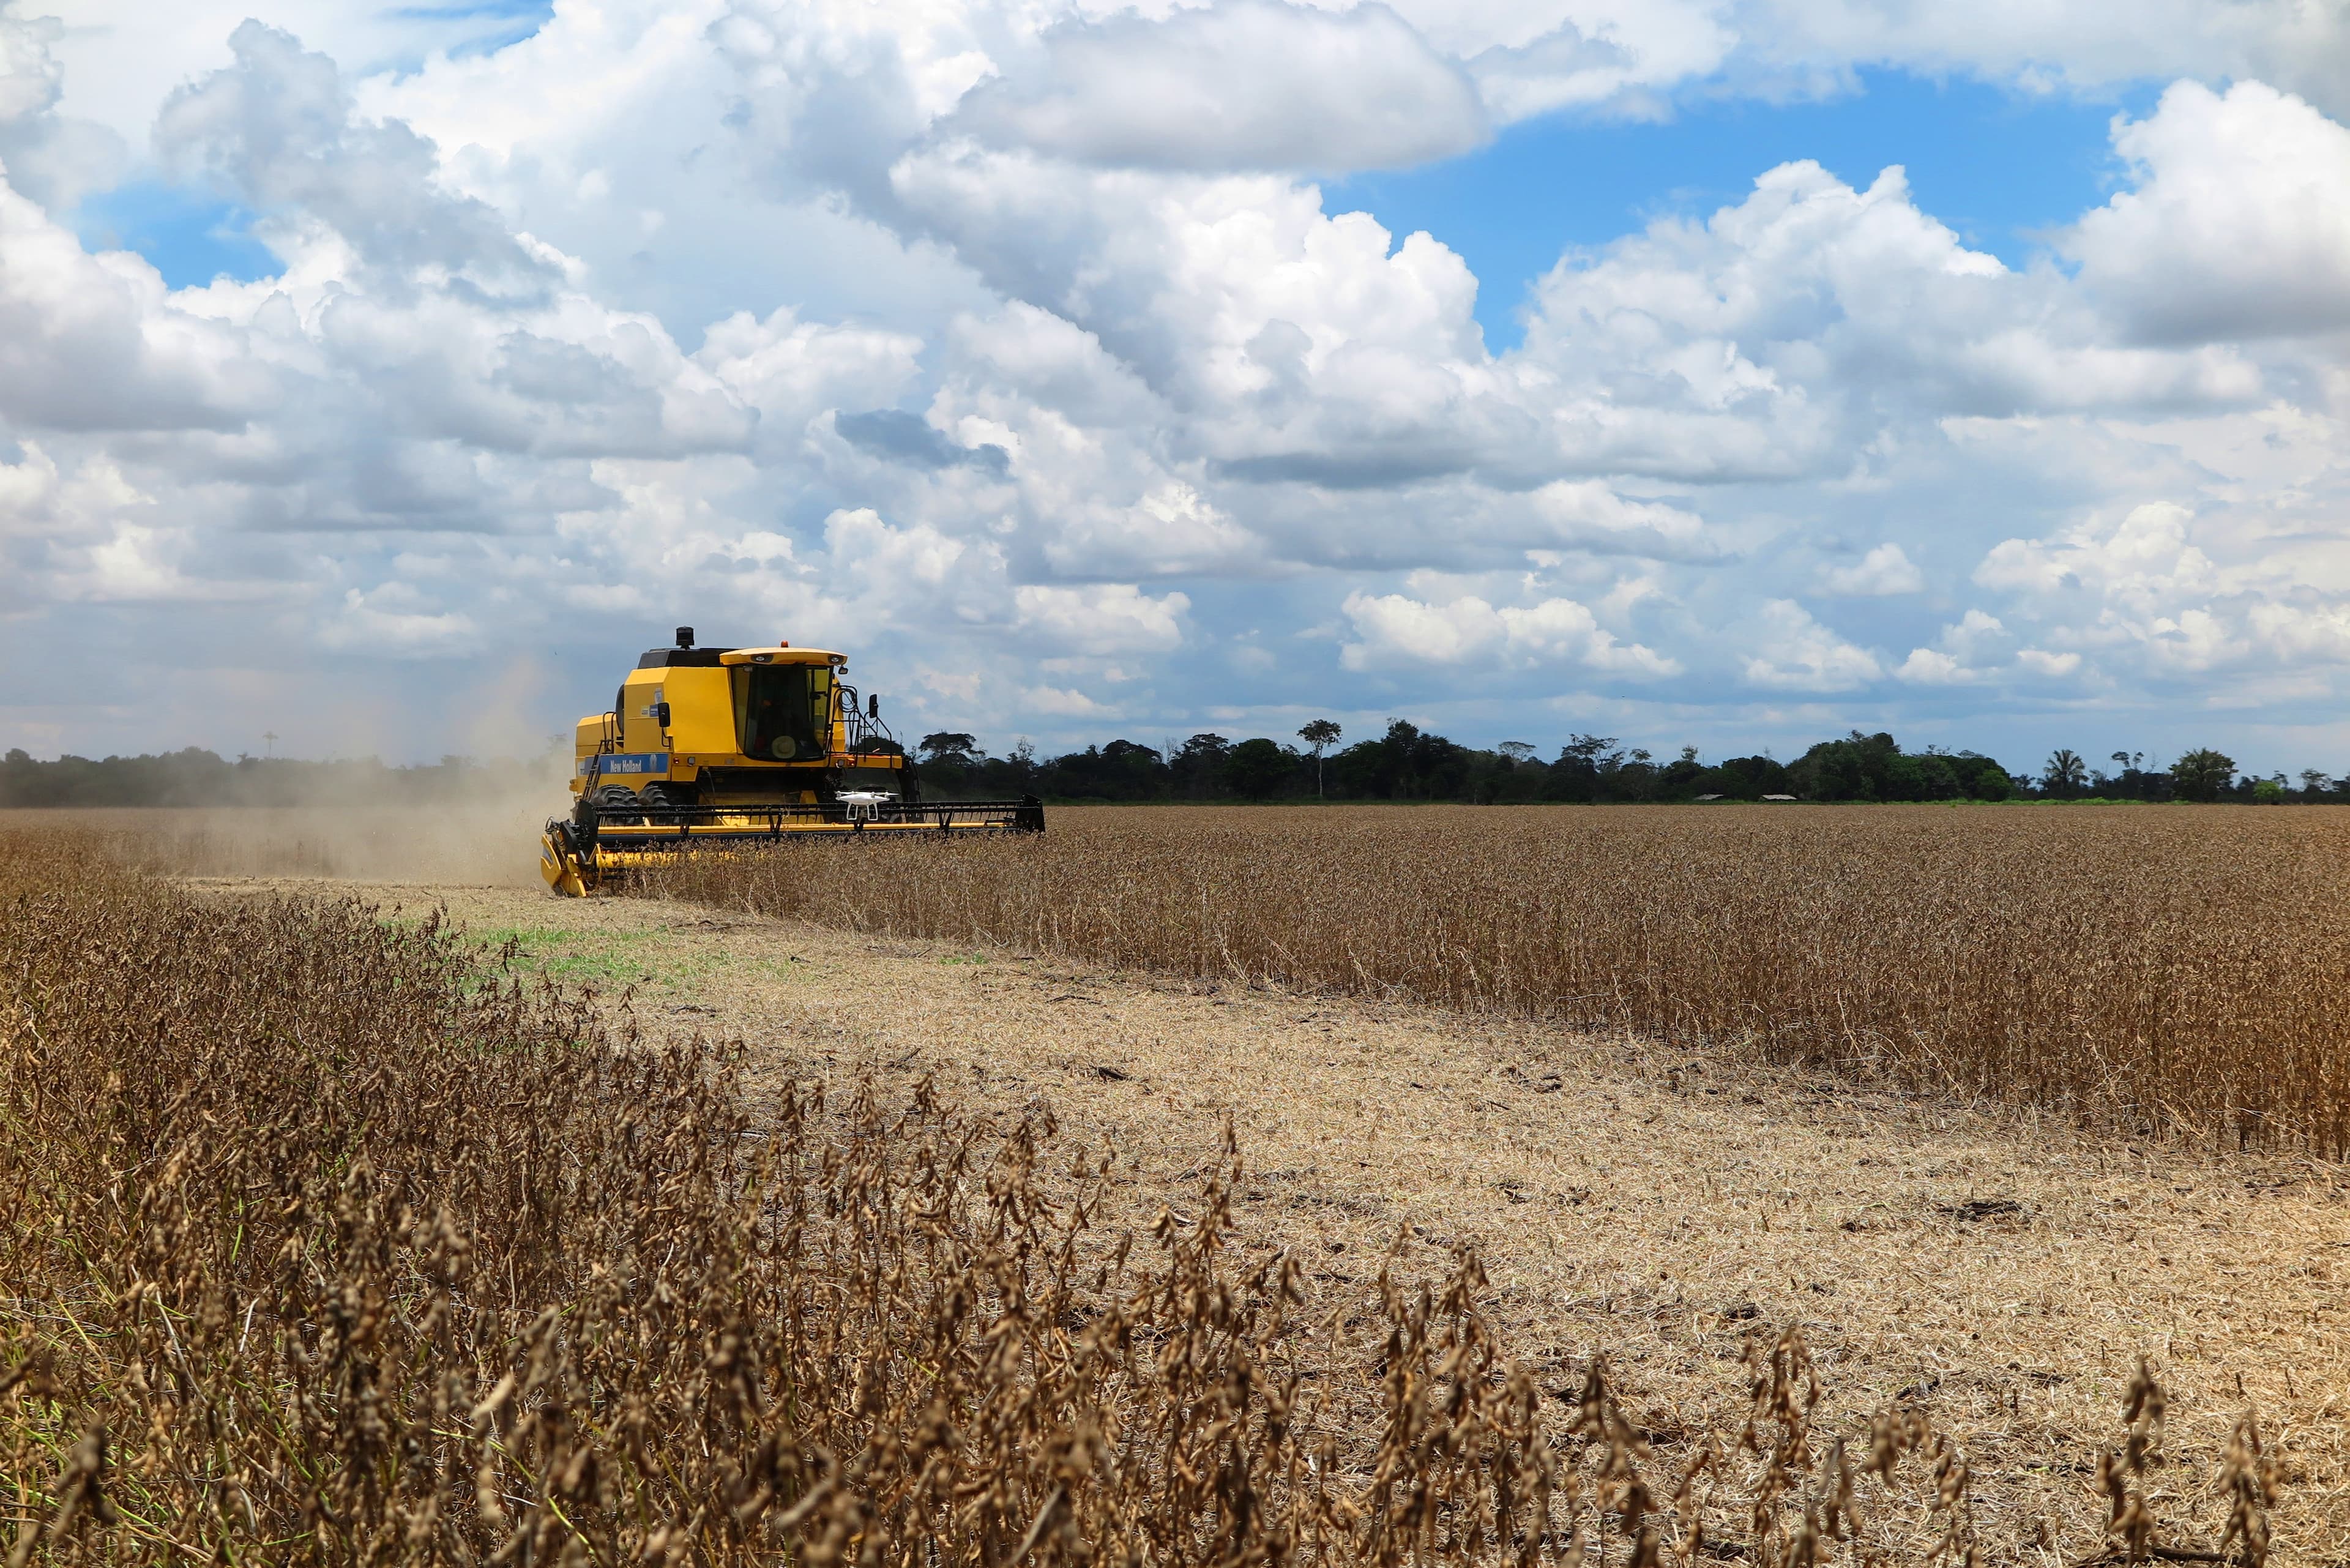 Sorriso PCI Compact creates a safe environment for investors interested in responsible soybean production